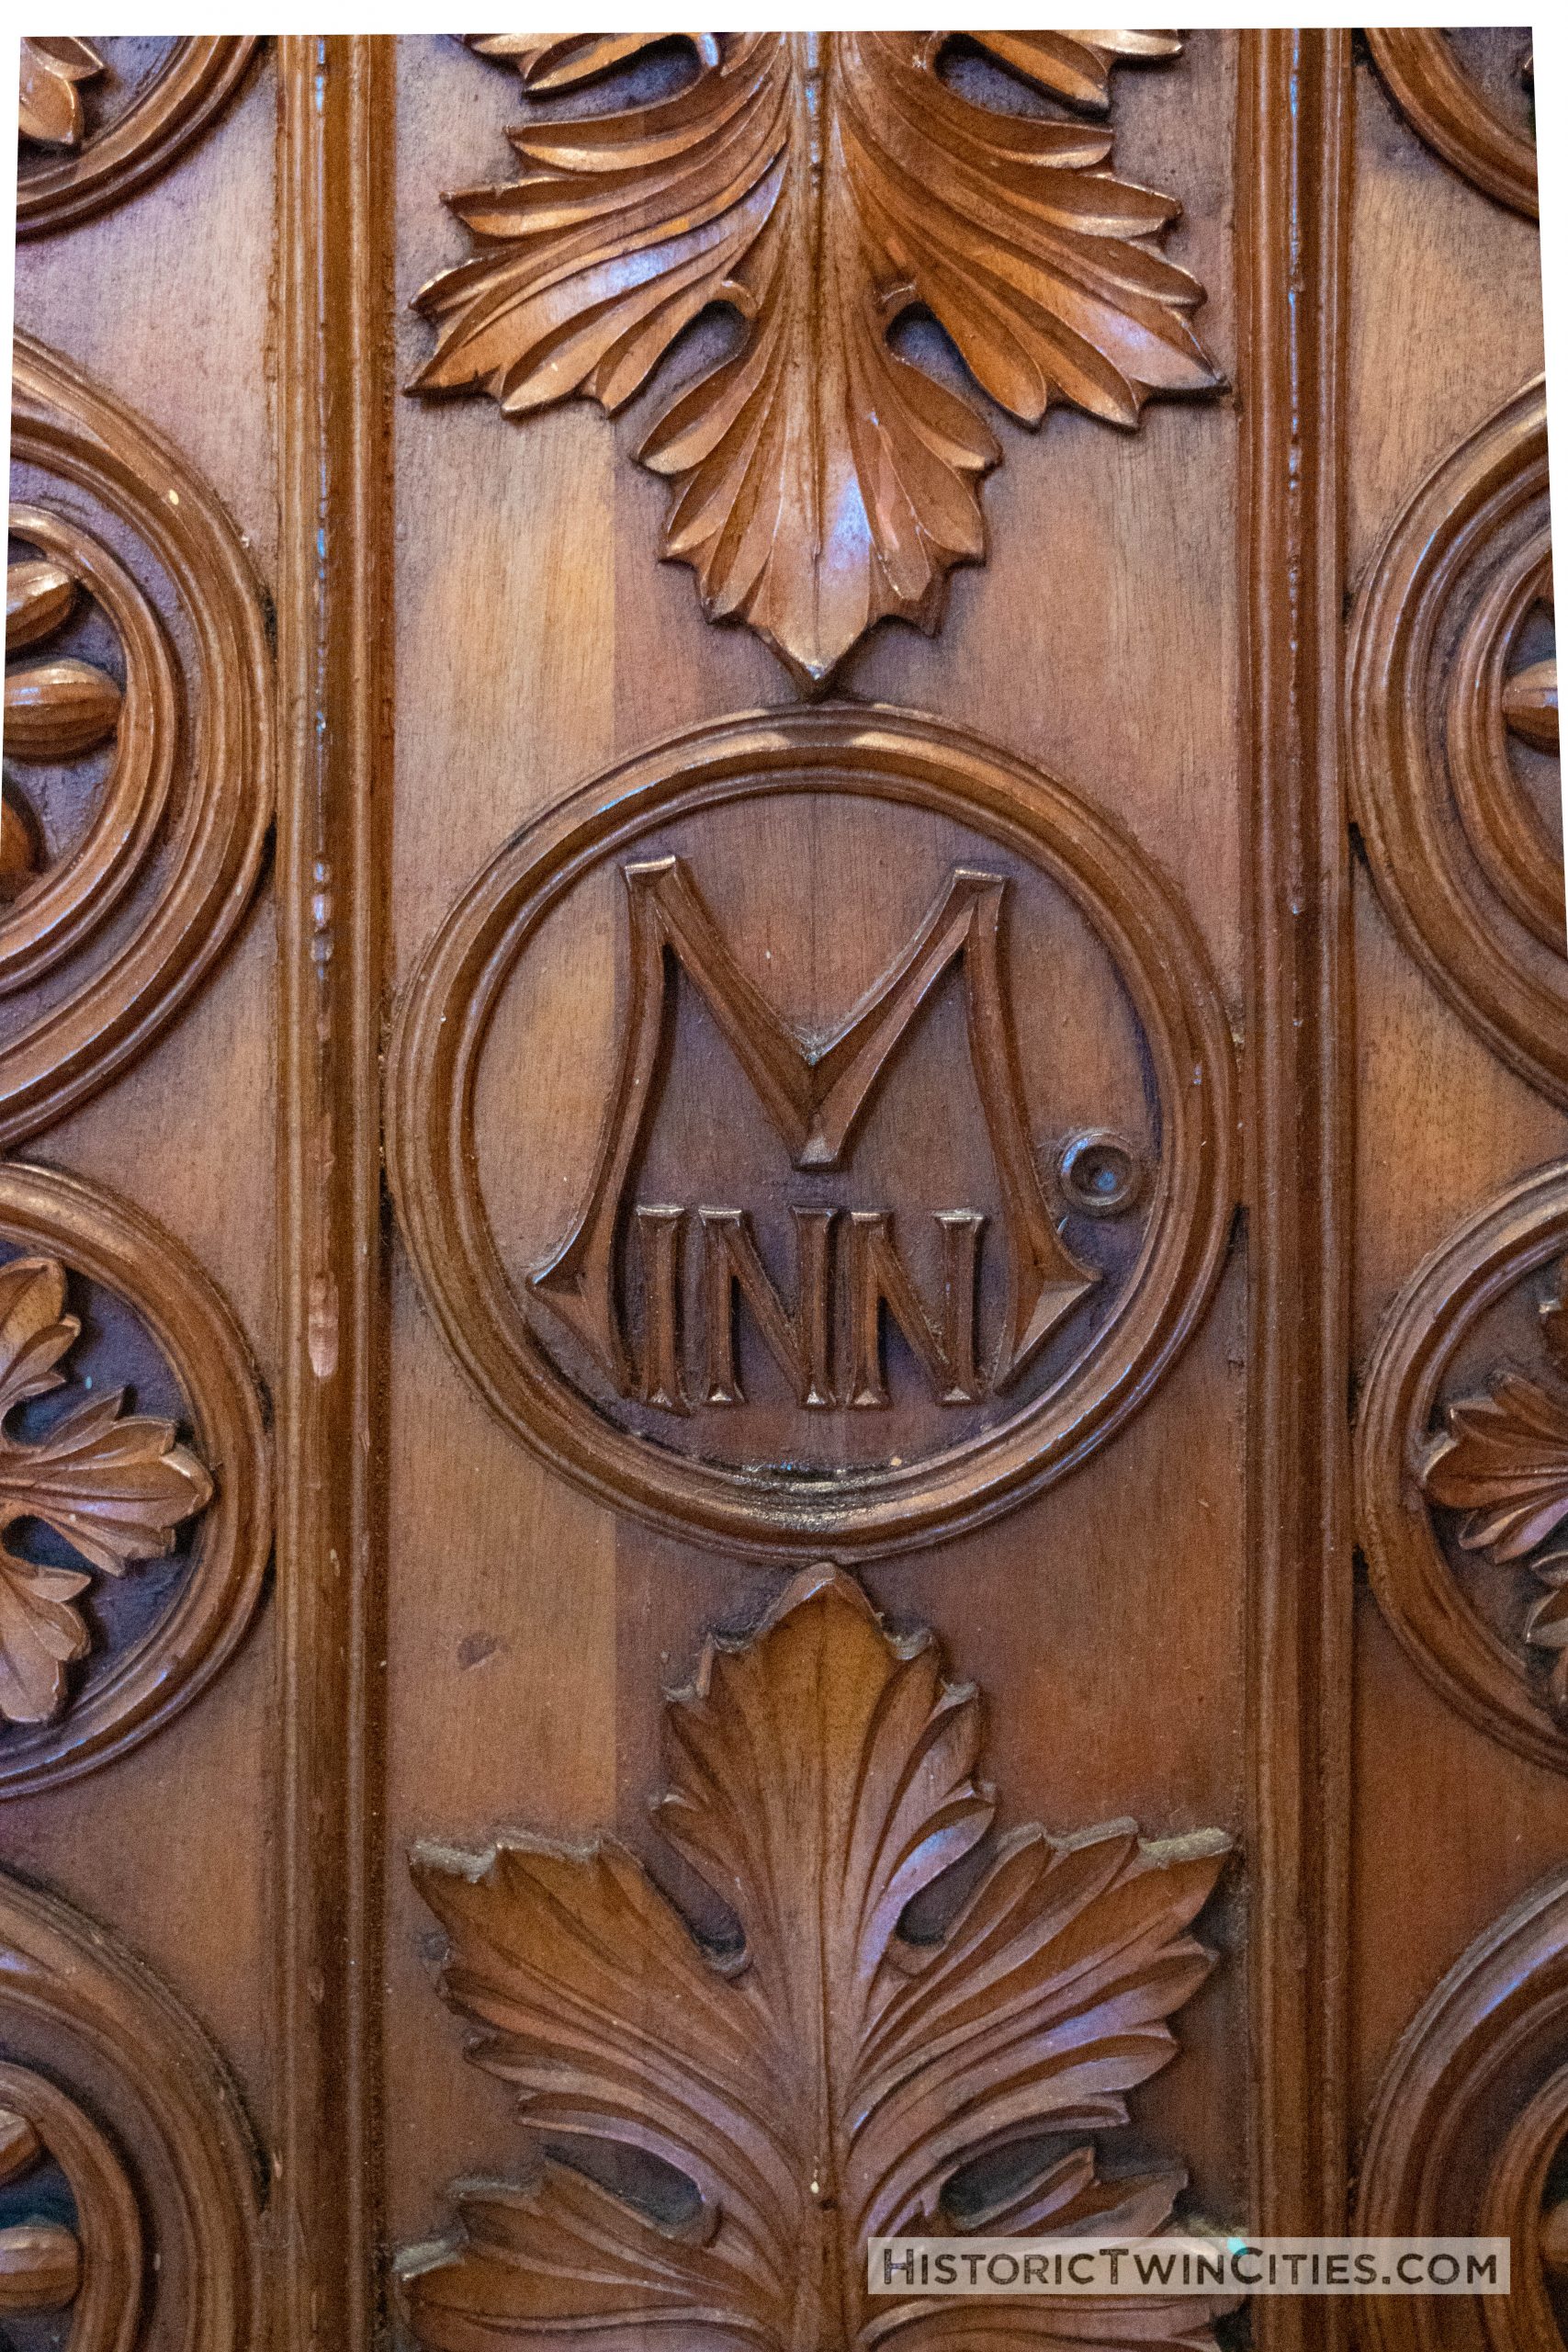 Woodcarving in the Chief Justice Room (Room 430), originally the Law Library, of the Landmark Center in St. Paul, MN